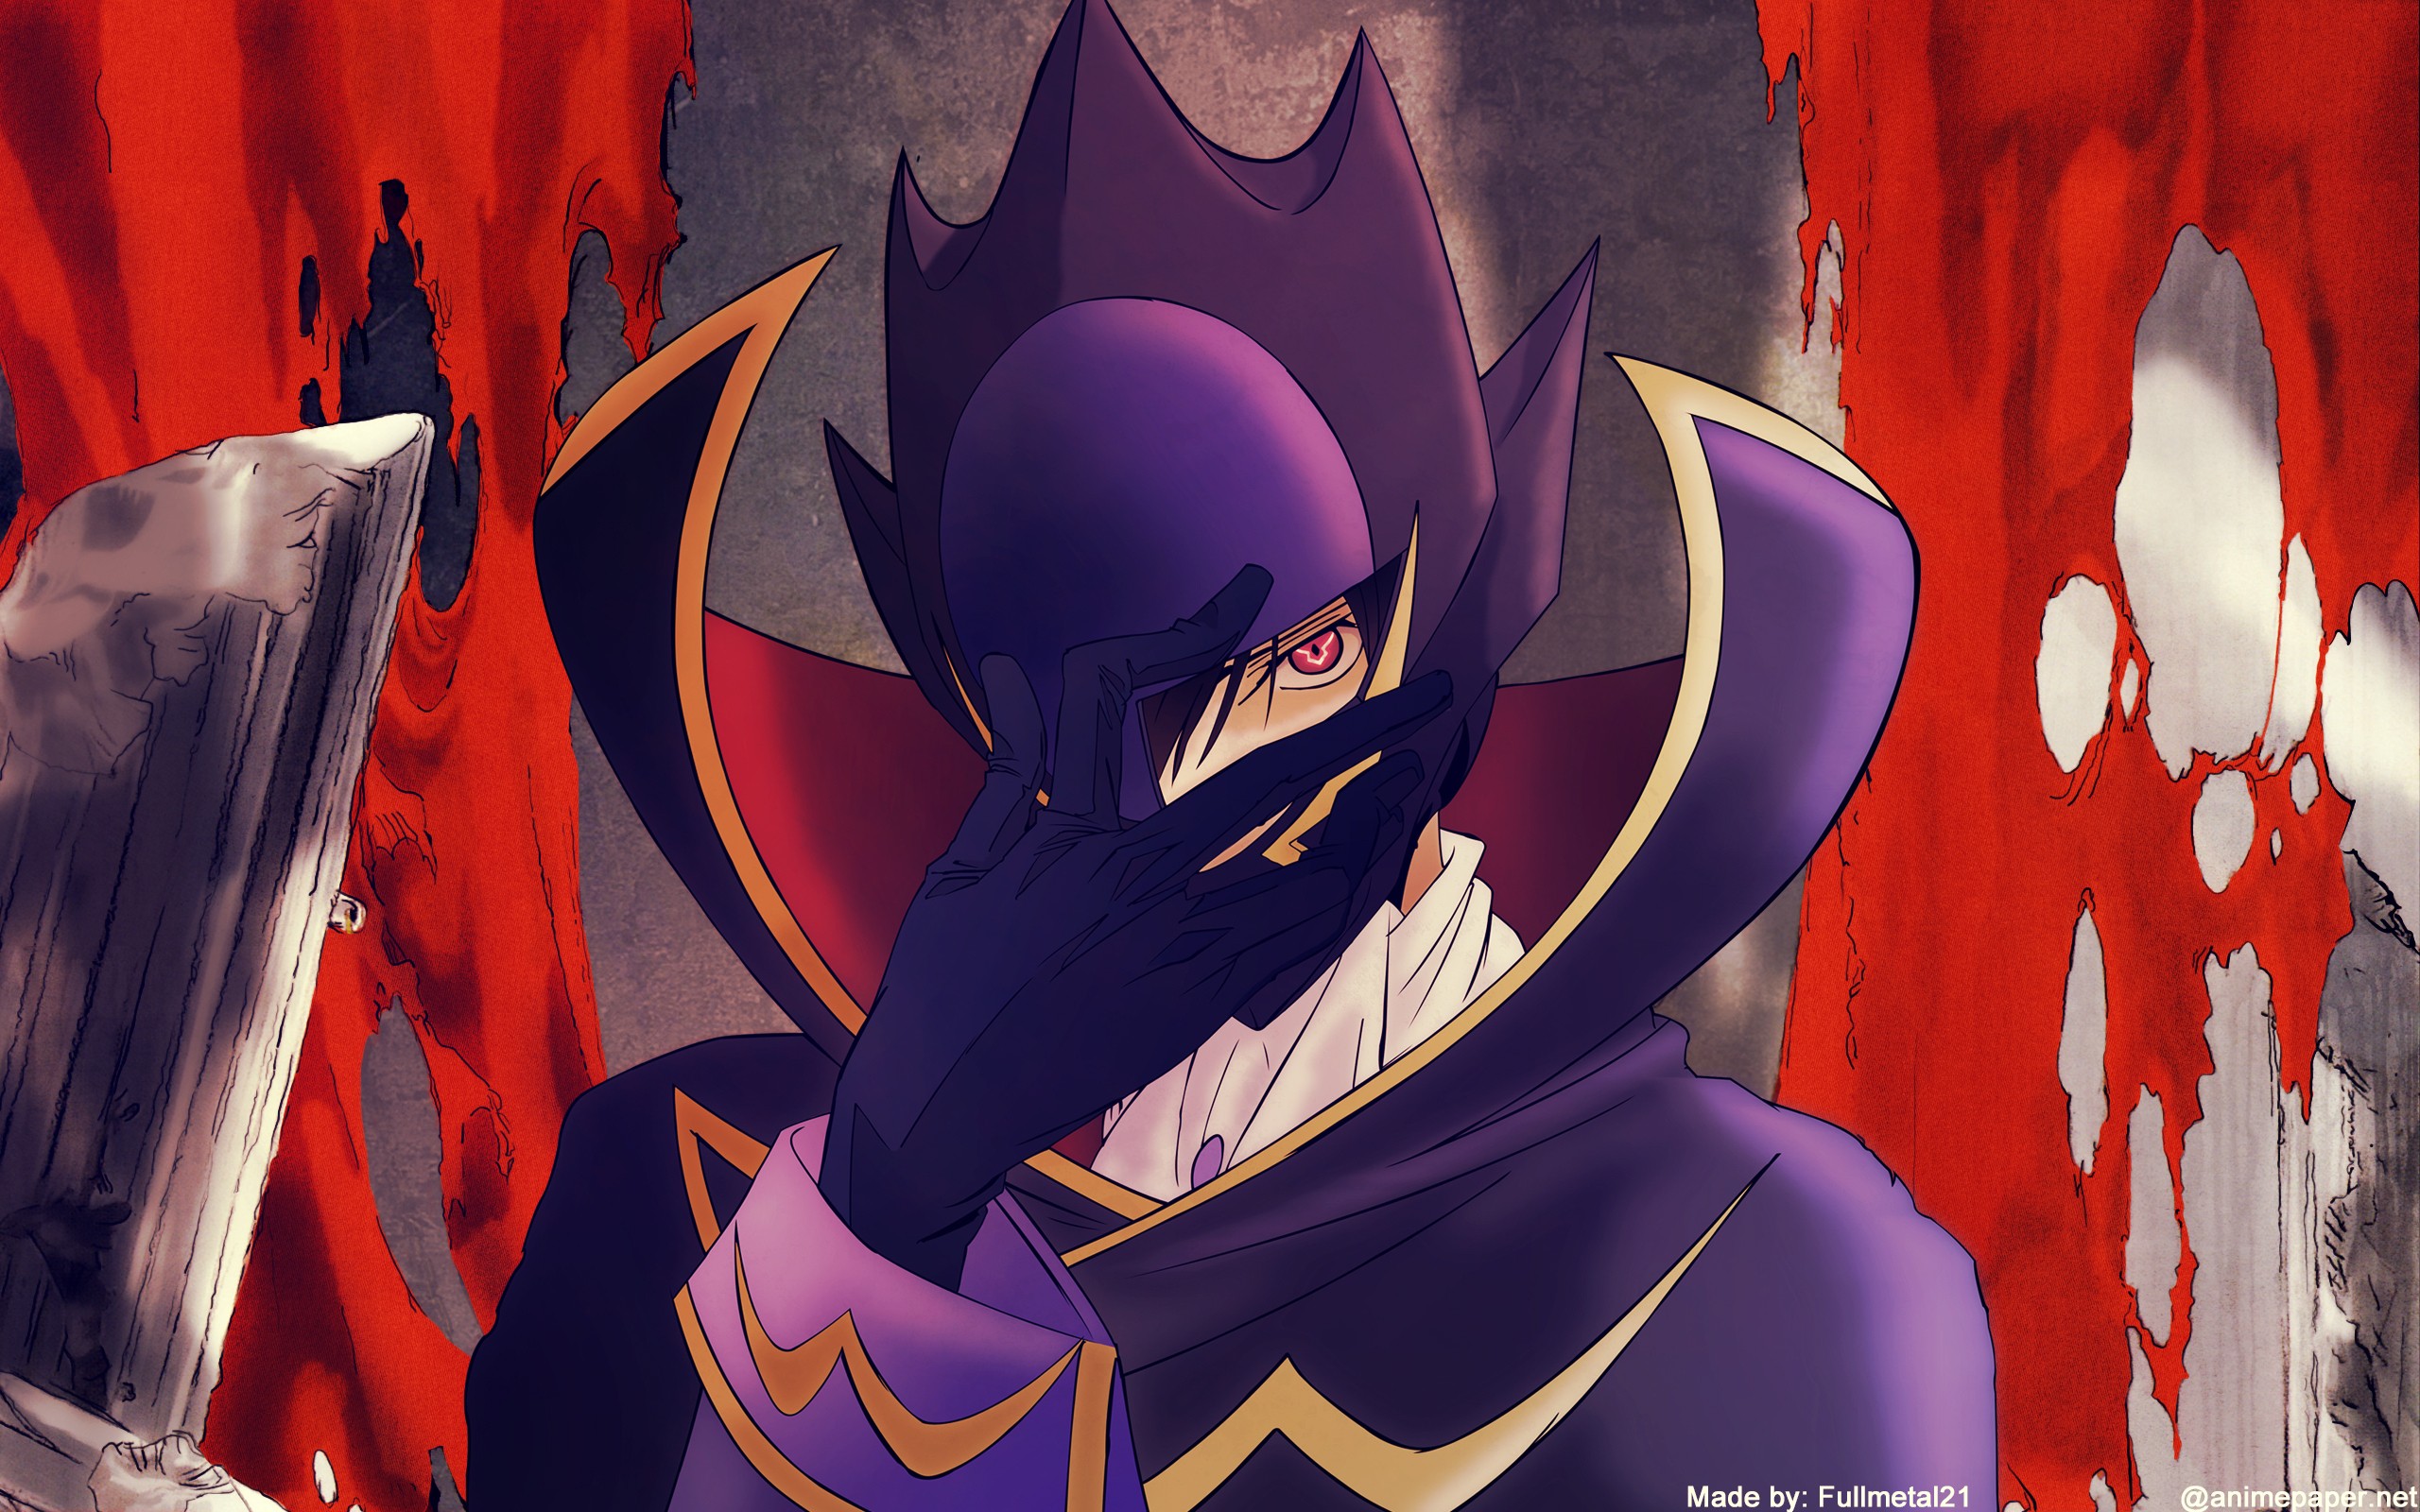 Zero Code Geass Lamperouge Lelouch The Order Of The Black Knights Anime 2560x1600